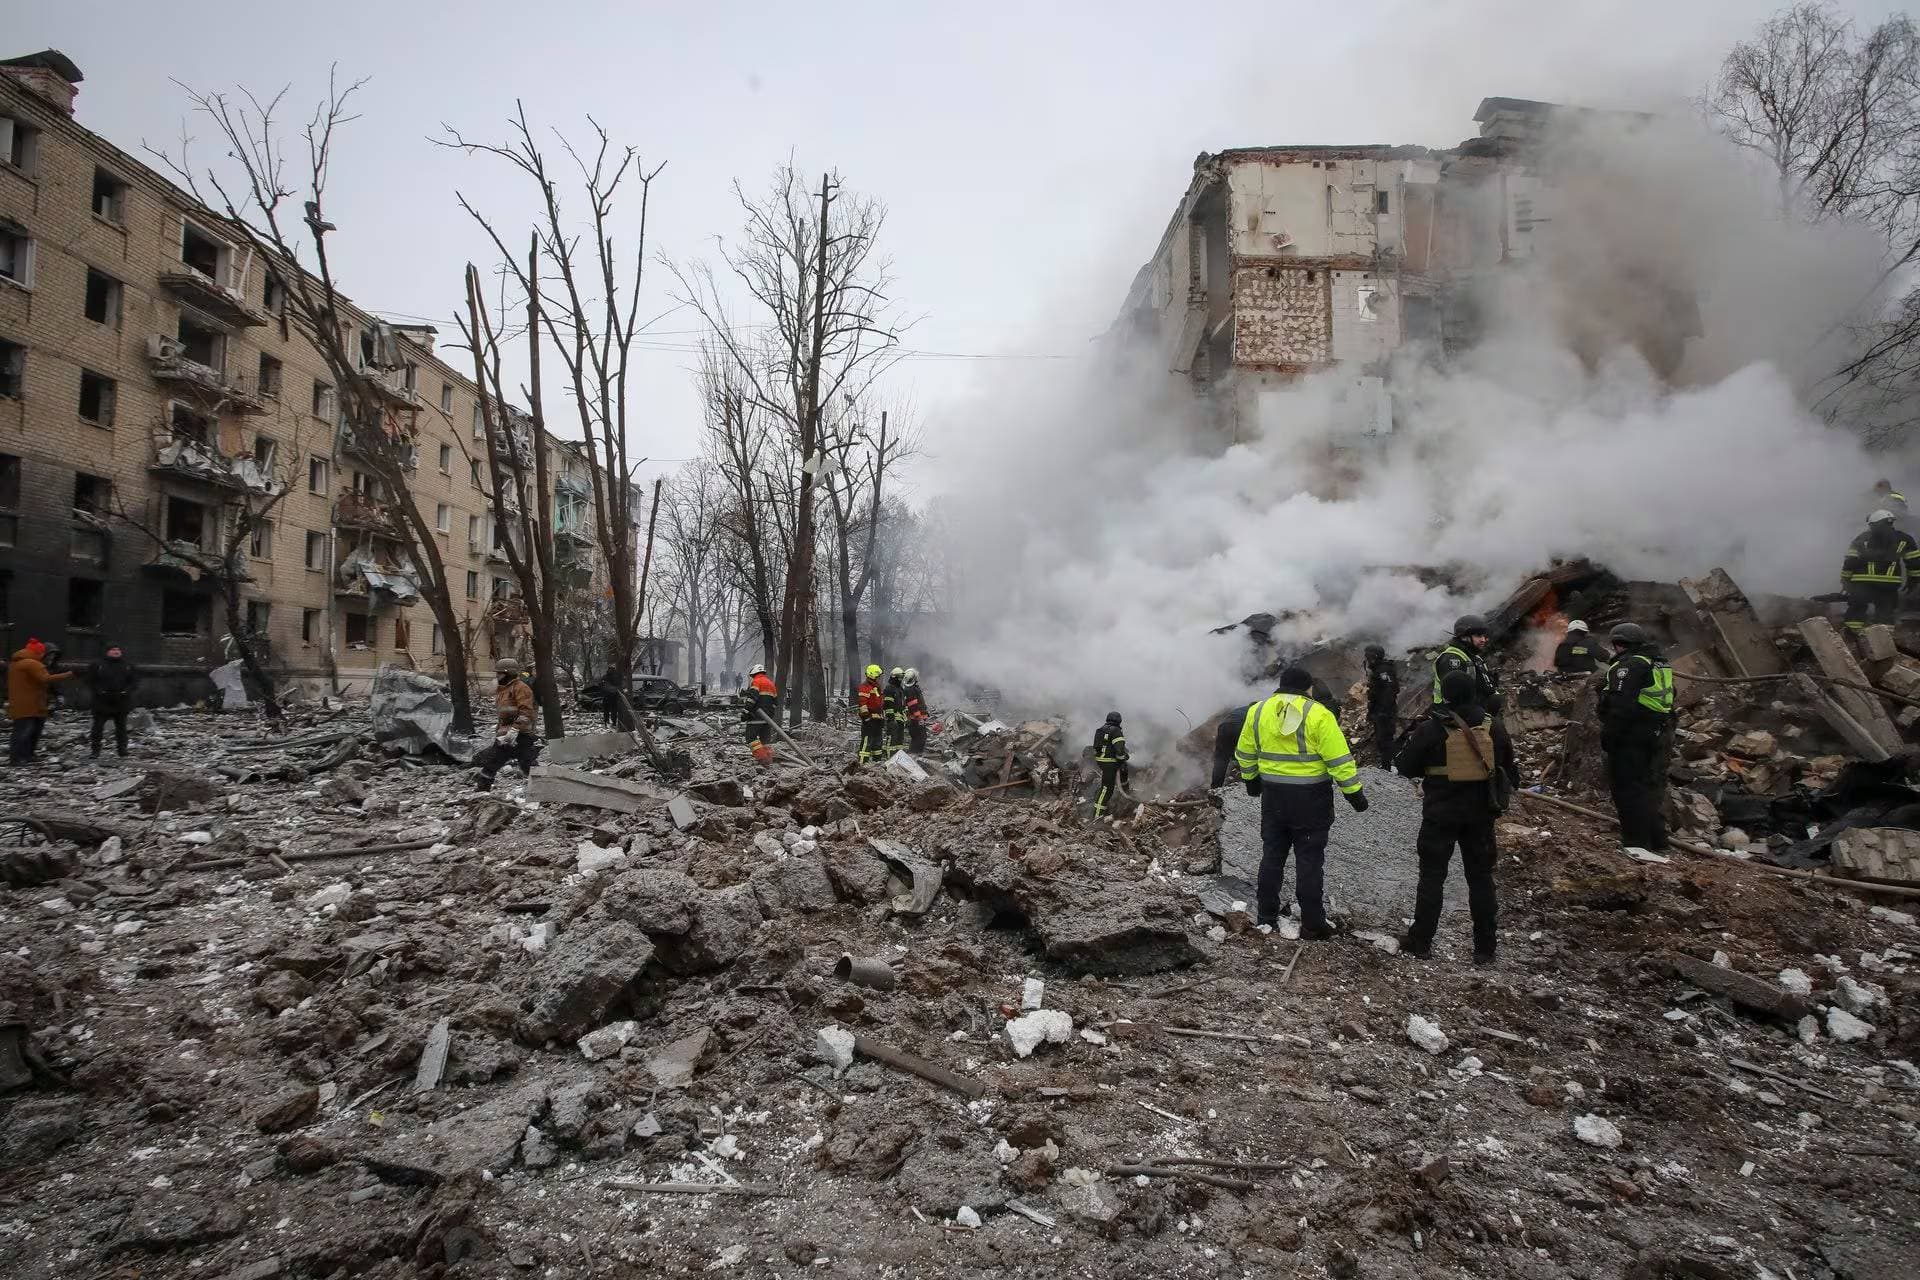 A view shows residential buildings heavily damaged during a Russian missile attack in Kharkiv